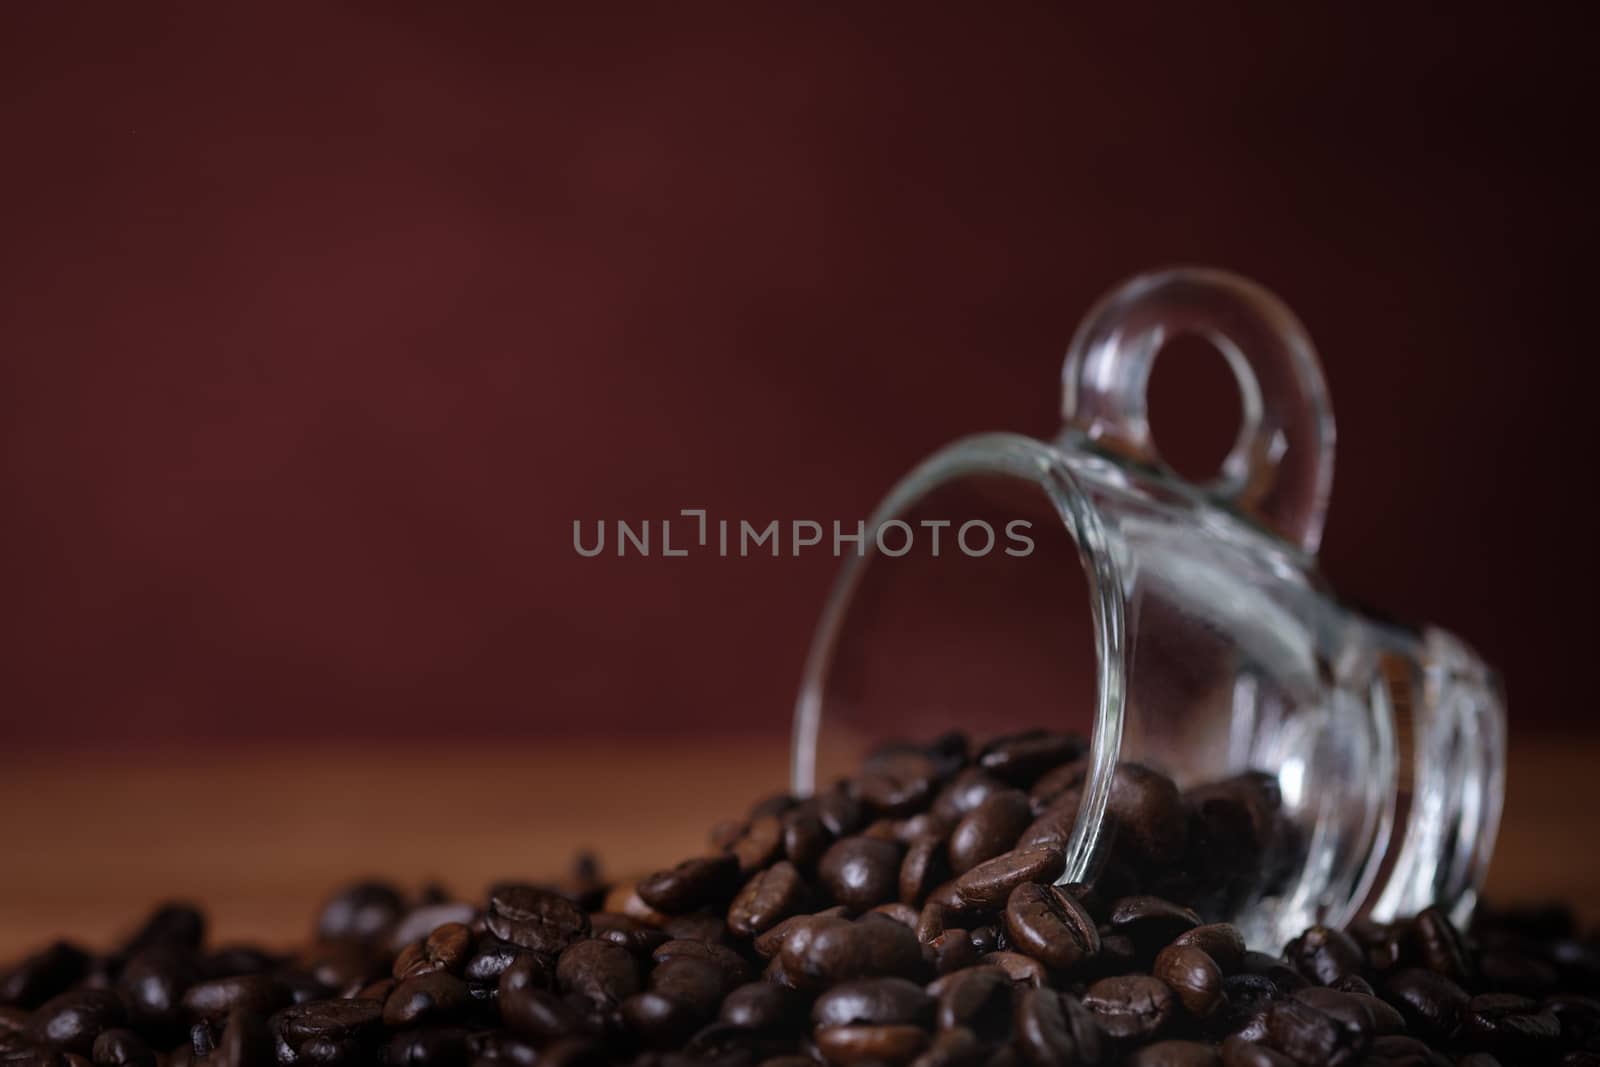 cup of coffee with roasted coffee beans 
On a wooden desk.